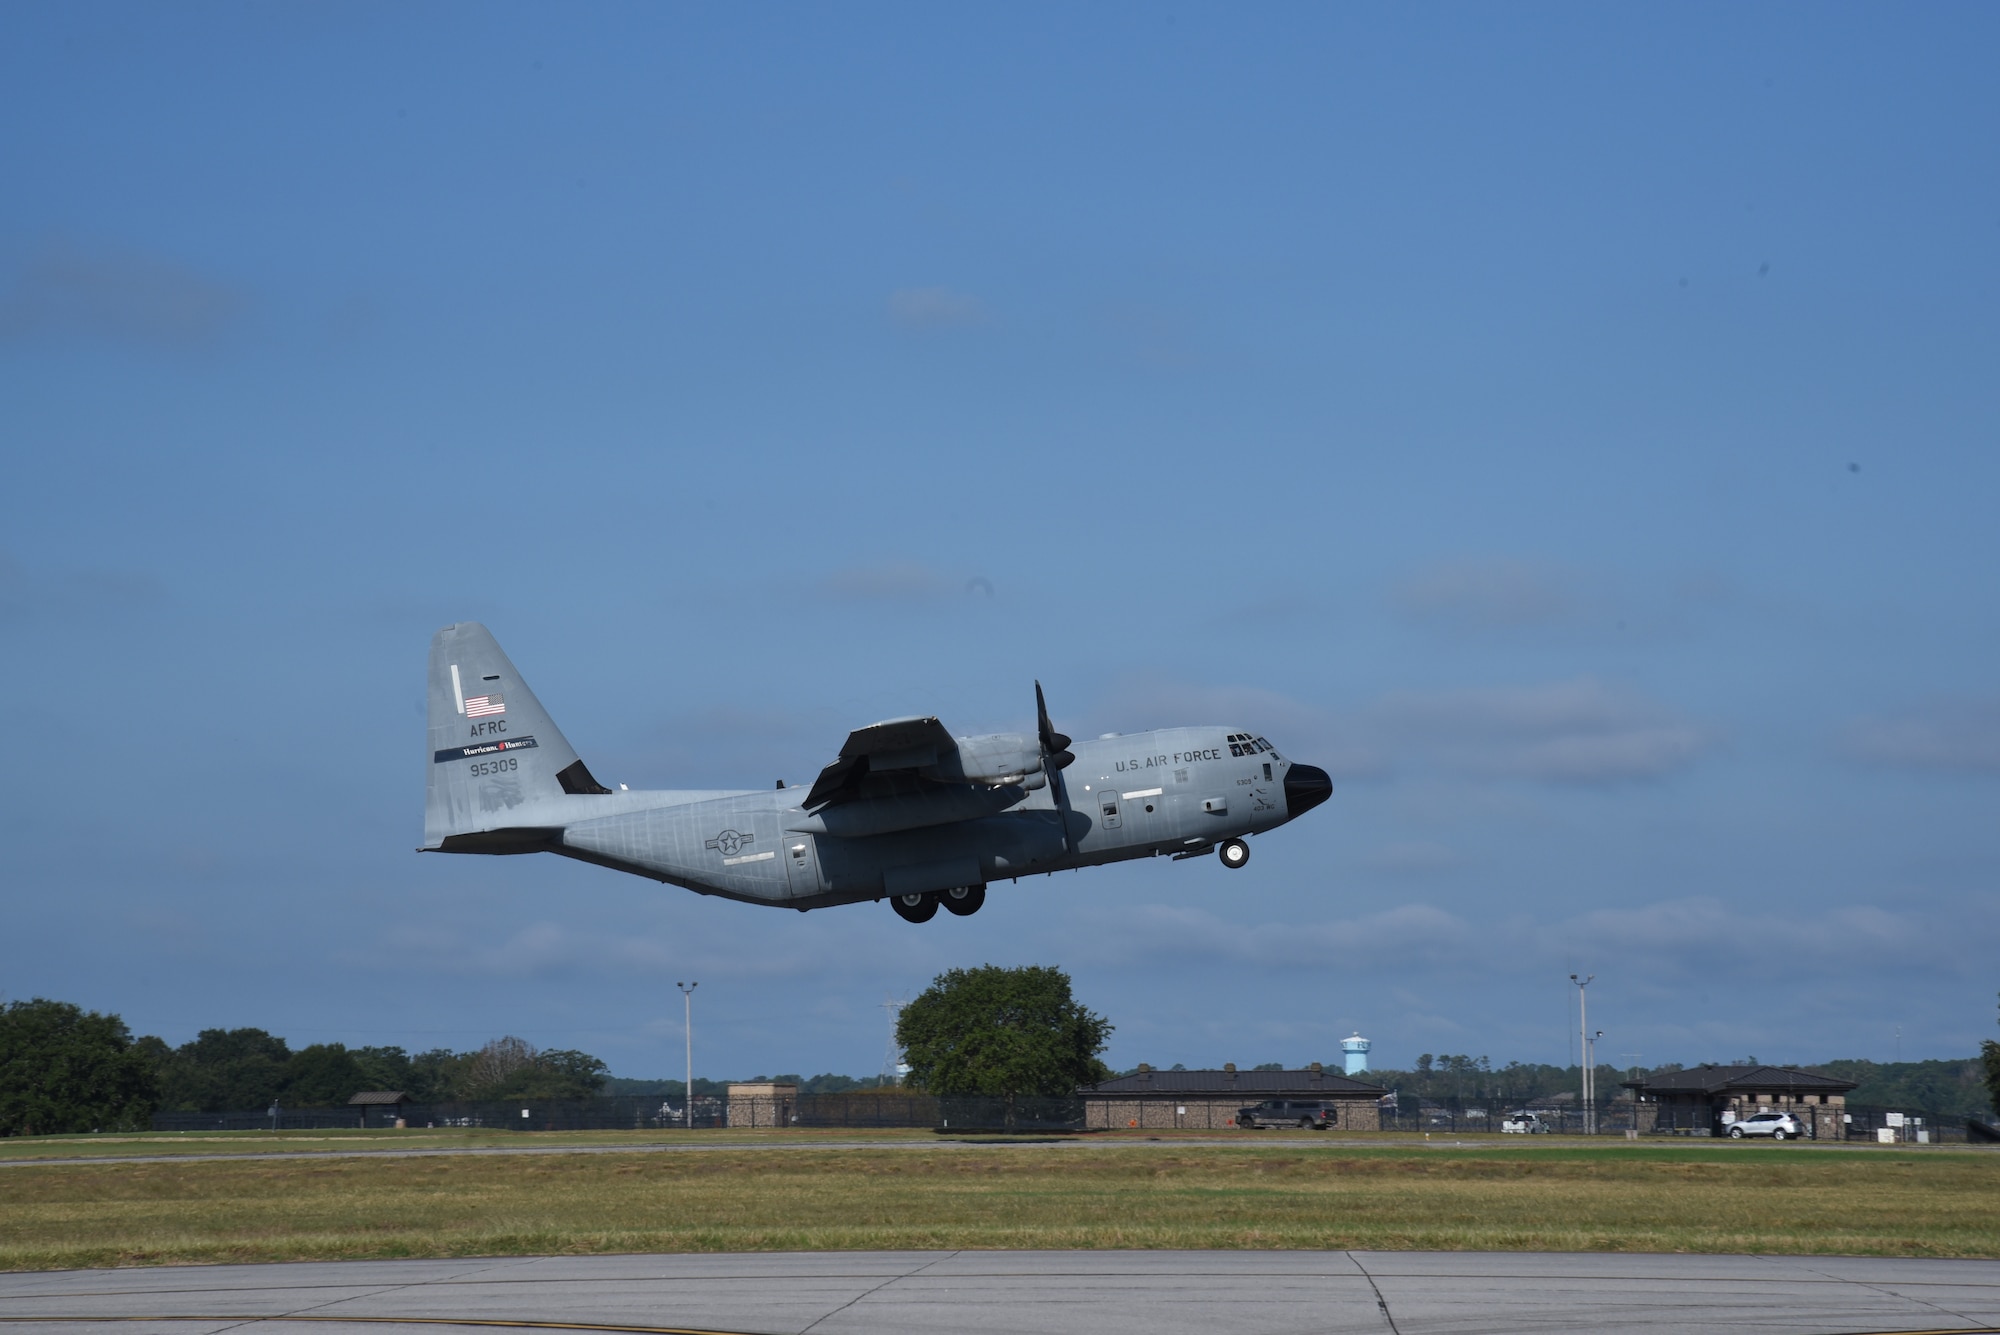 Air Force Reserve members of the 53rd Weather Reconnaissance Squadron, or Hurricane Hunters, take-off for their first mission into Tropical Storm Zeta today out of Keesler Air Force Base, Miss. The Hurricane Hunters collect weather data real-time and transmit that data to the National Hurricane Center, which assists in improving and updating the tracking forecasts models. (U.S. Air Force photo by Jessica L. Kendziorek)